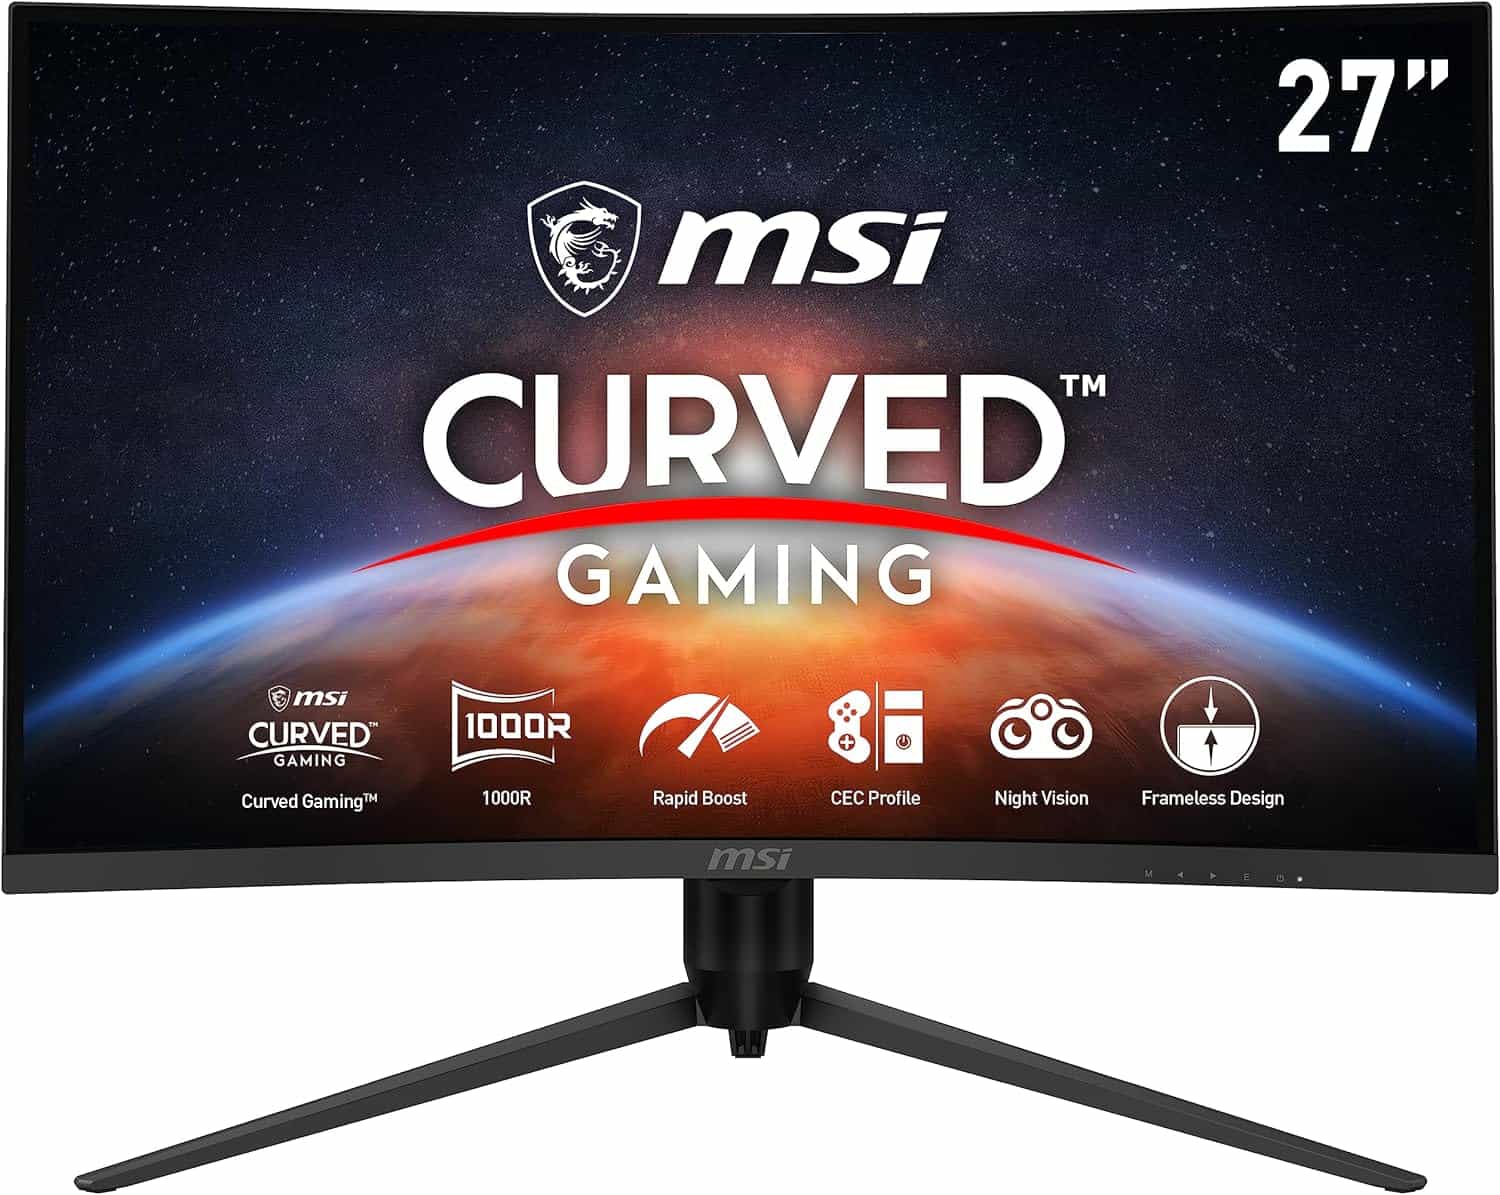 240Hz BenQ monitor perfect for CS2 just got a big price cut in Cyber Monday  deal